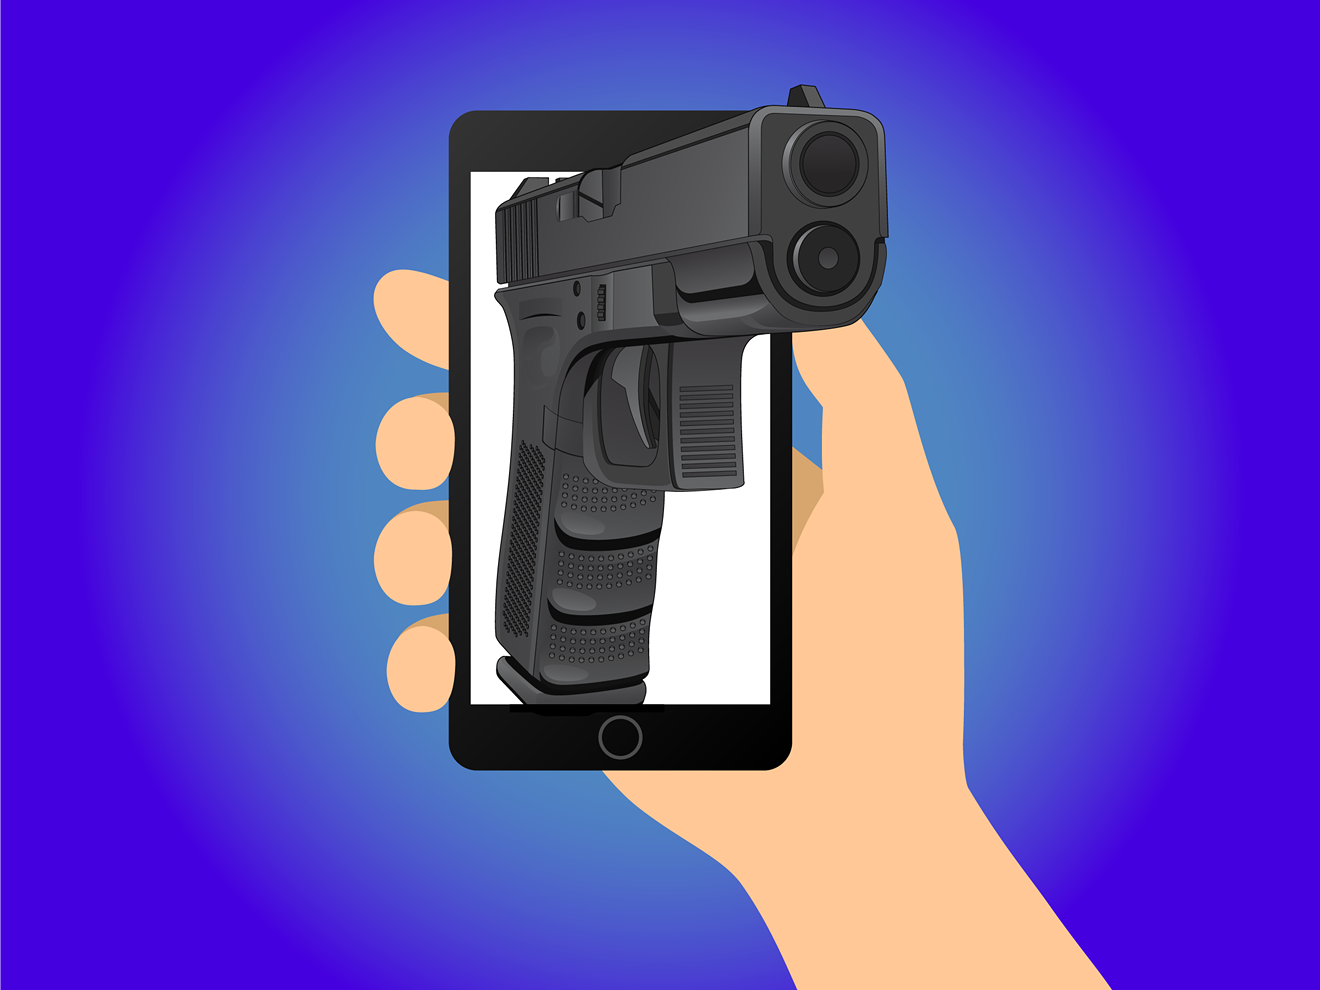 More "Glock switches" are being sold over apps like Instagram and Snapchat.